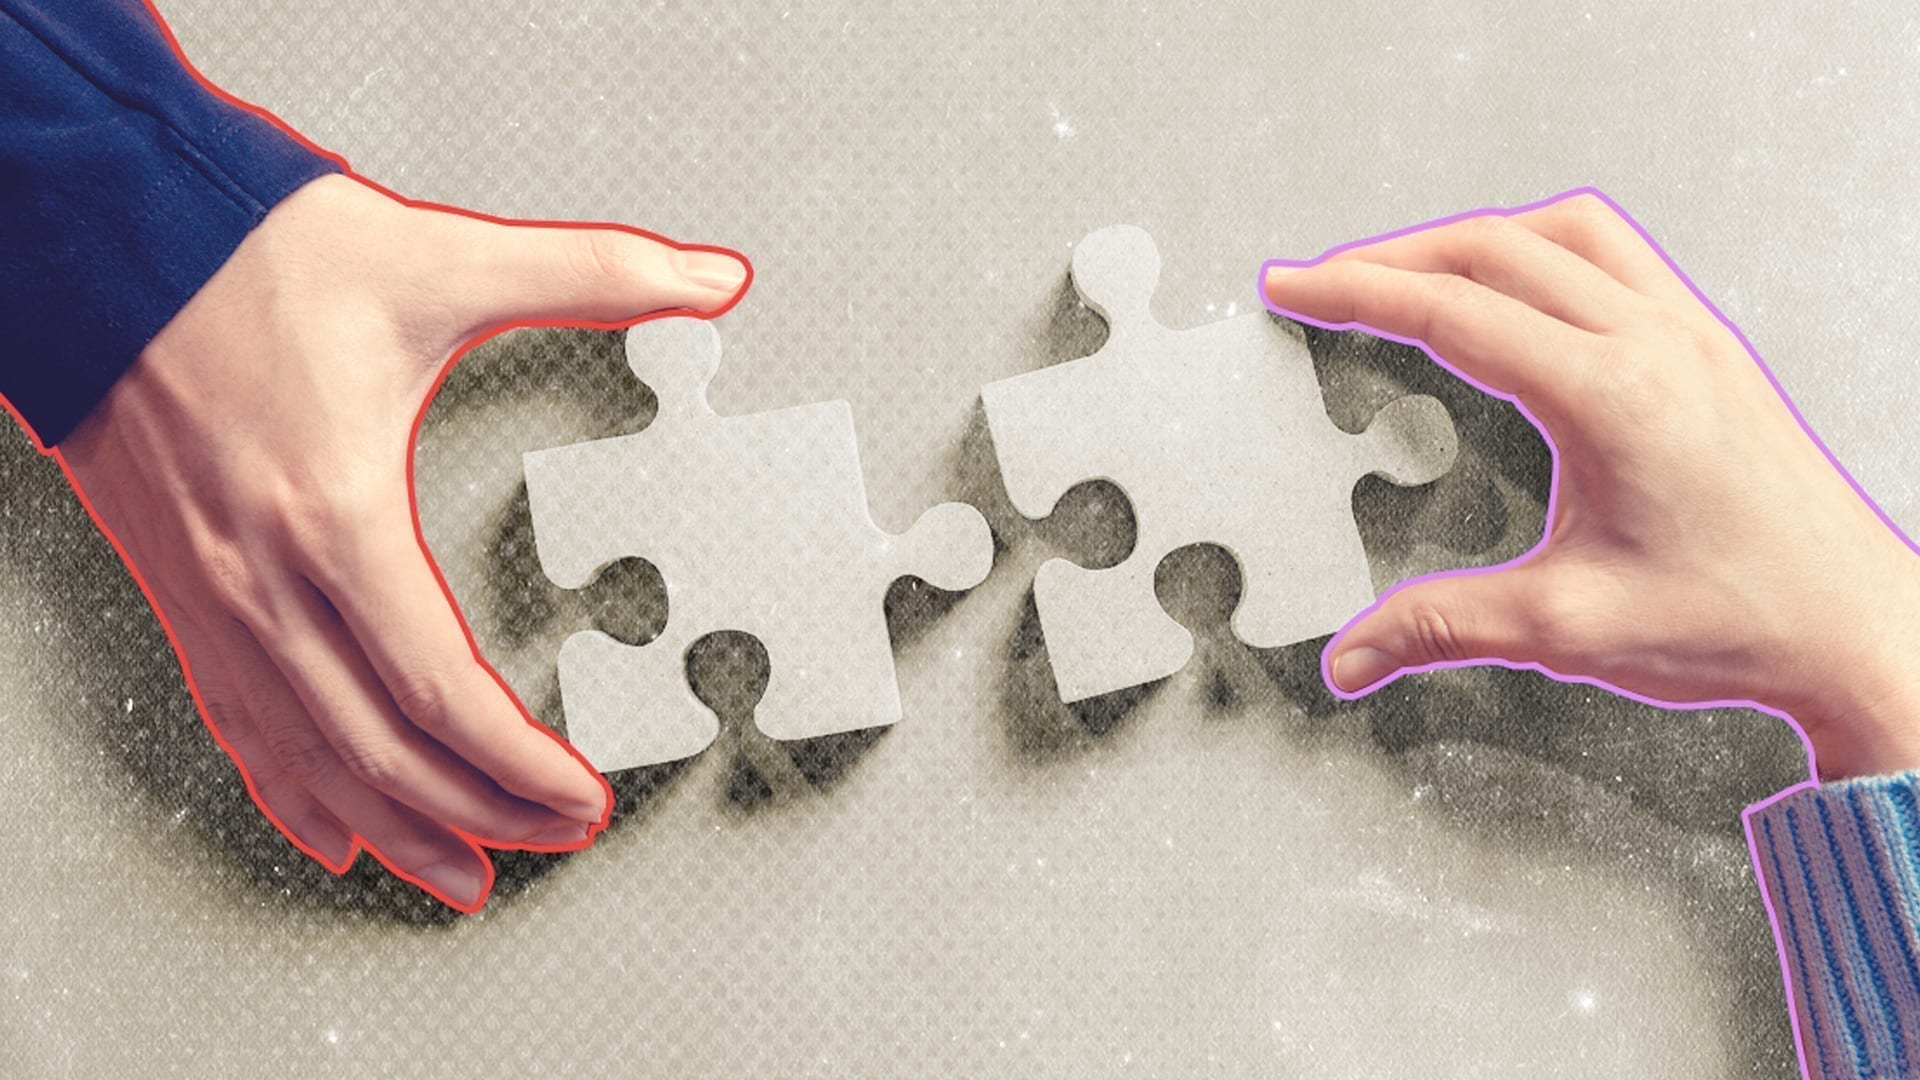 Top Tips Towards Client-Agency Nirvana - Two Hands Putting Together Puzzle Pieces